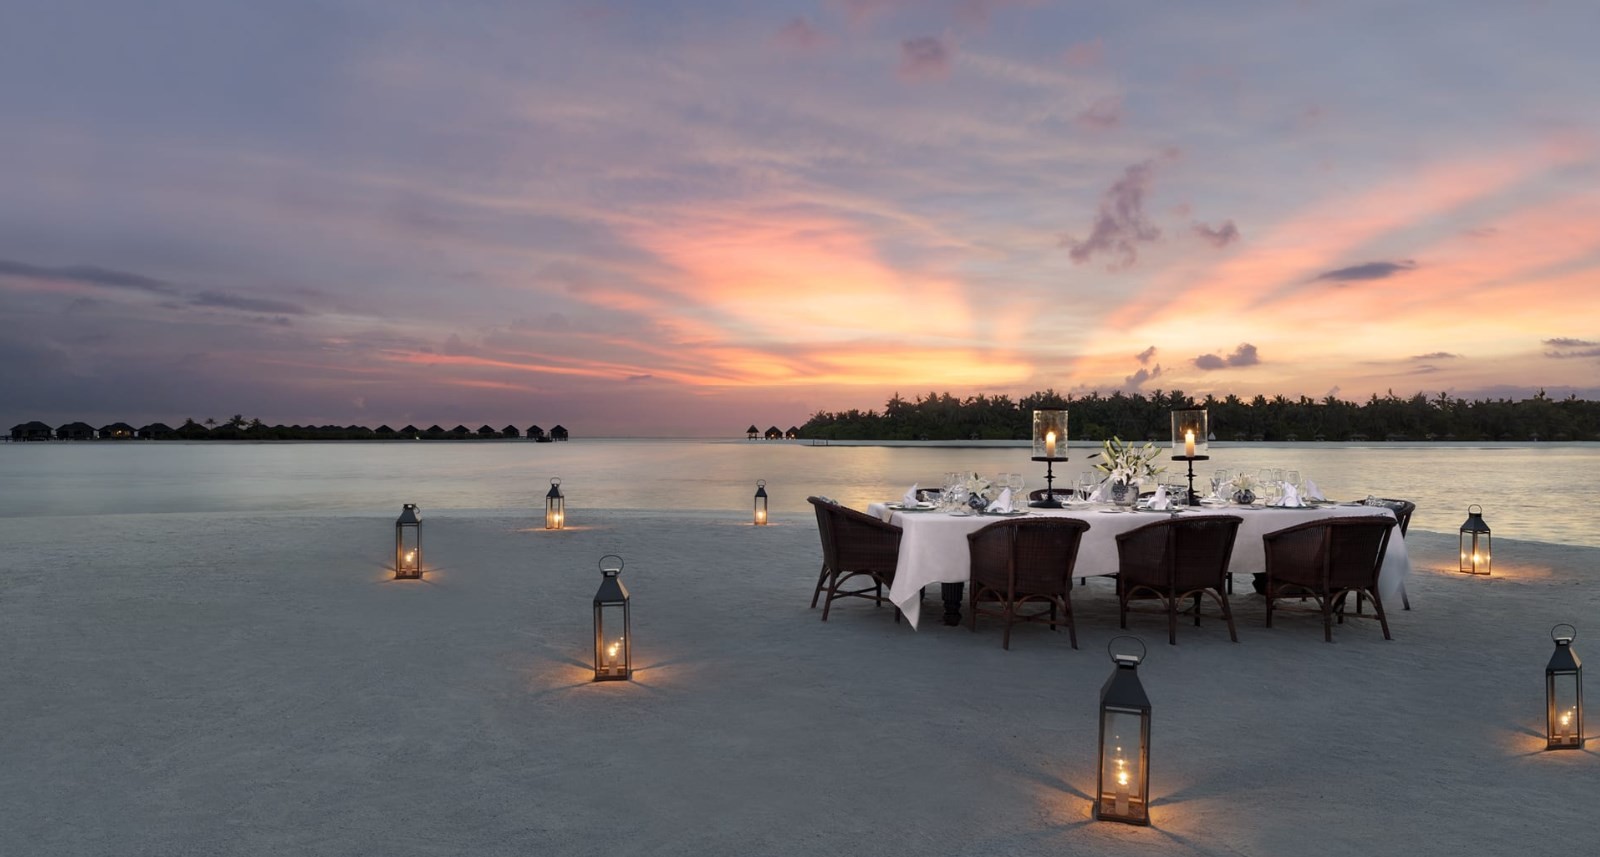 news-main-anantara-announces-extension-of-stay-with-peace-of-mind-programme-to-include-mice-facilities.1590423454.jpg